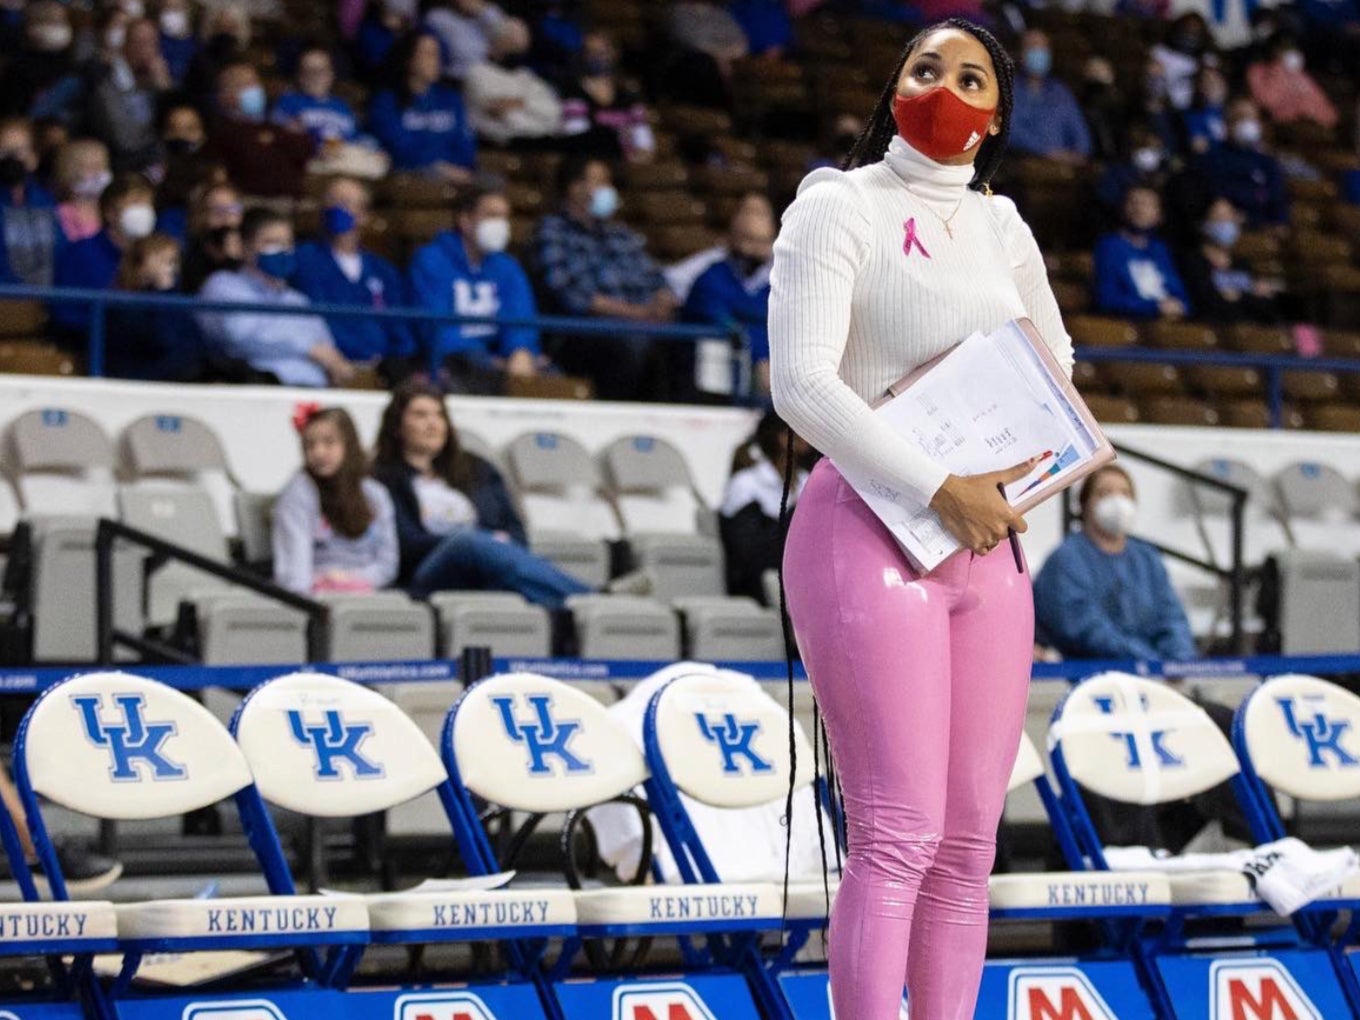 Sydney Carter, coach of the Texas A&M women’s basketball team, shared this photo of her game day outfit on social media